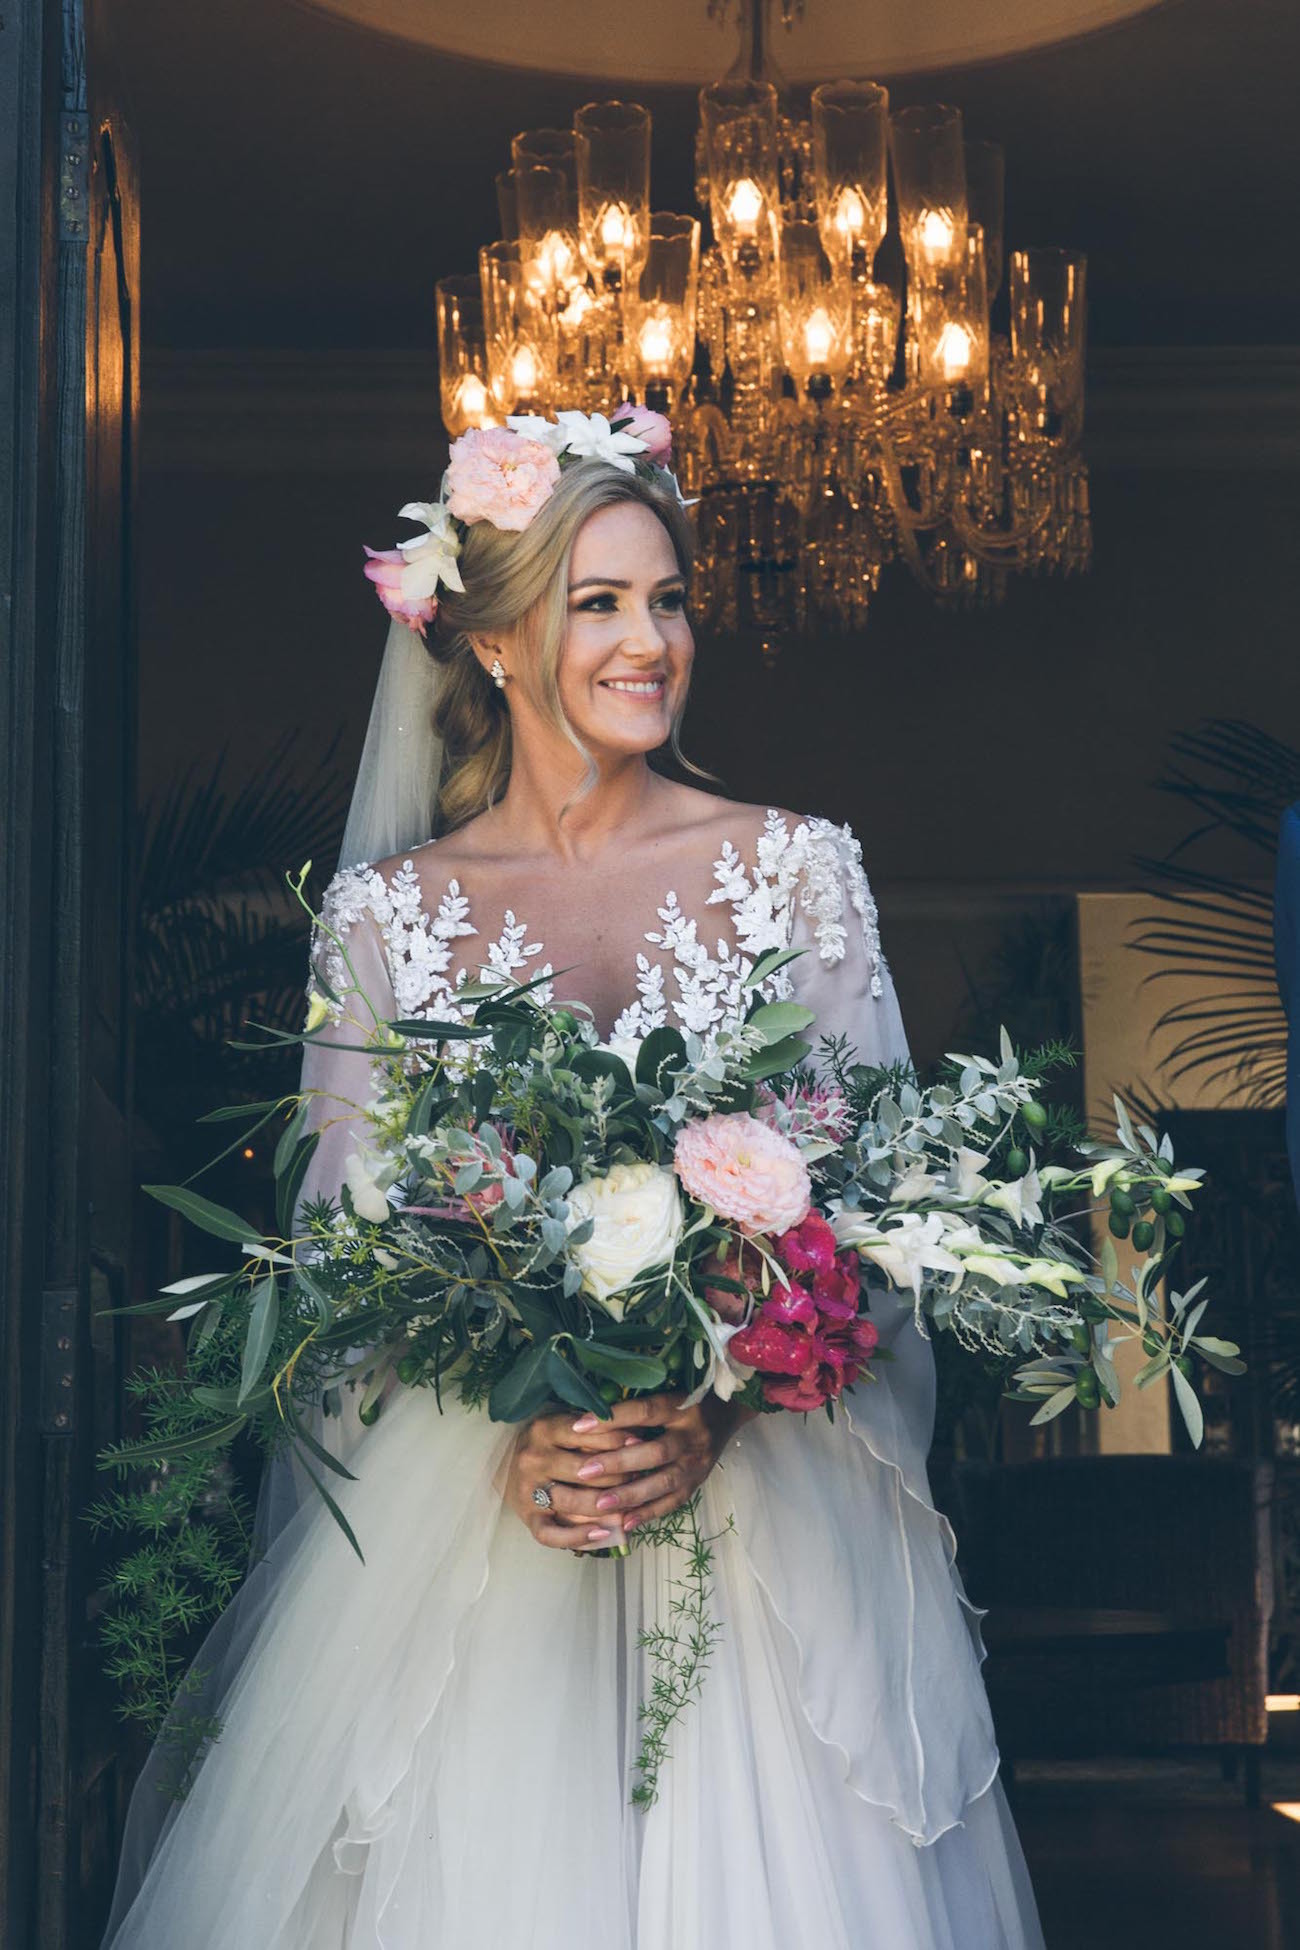 Bride with handtied bouquet and floral crown | Credit: Shanna Jones